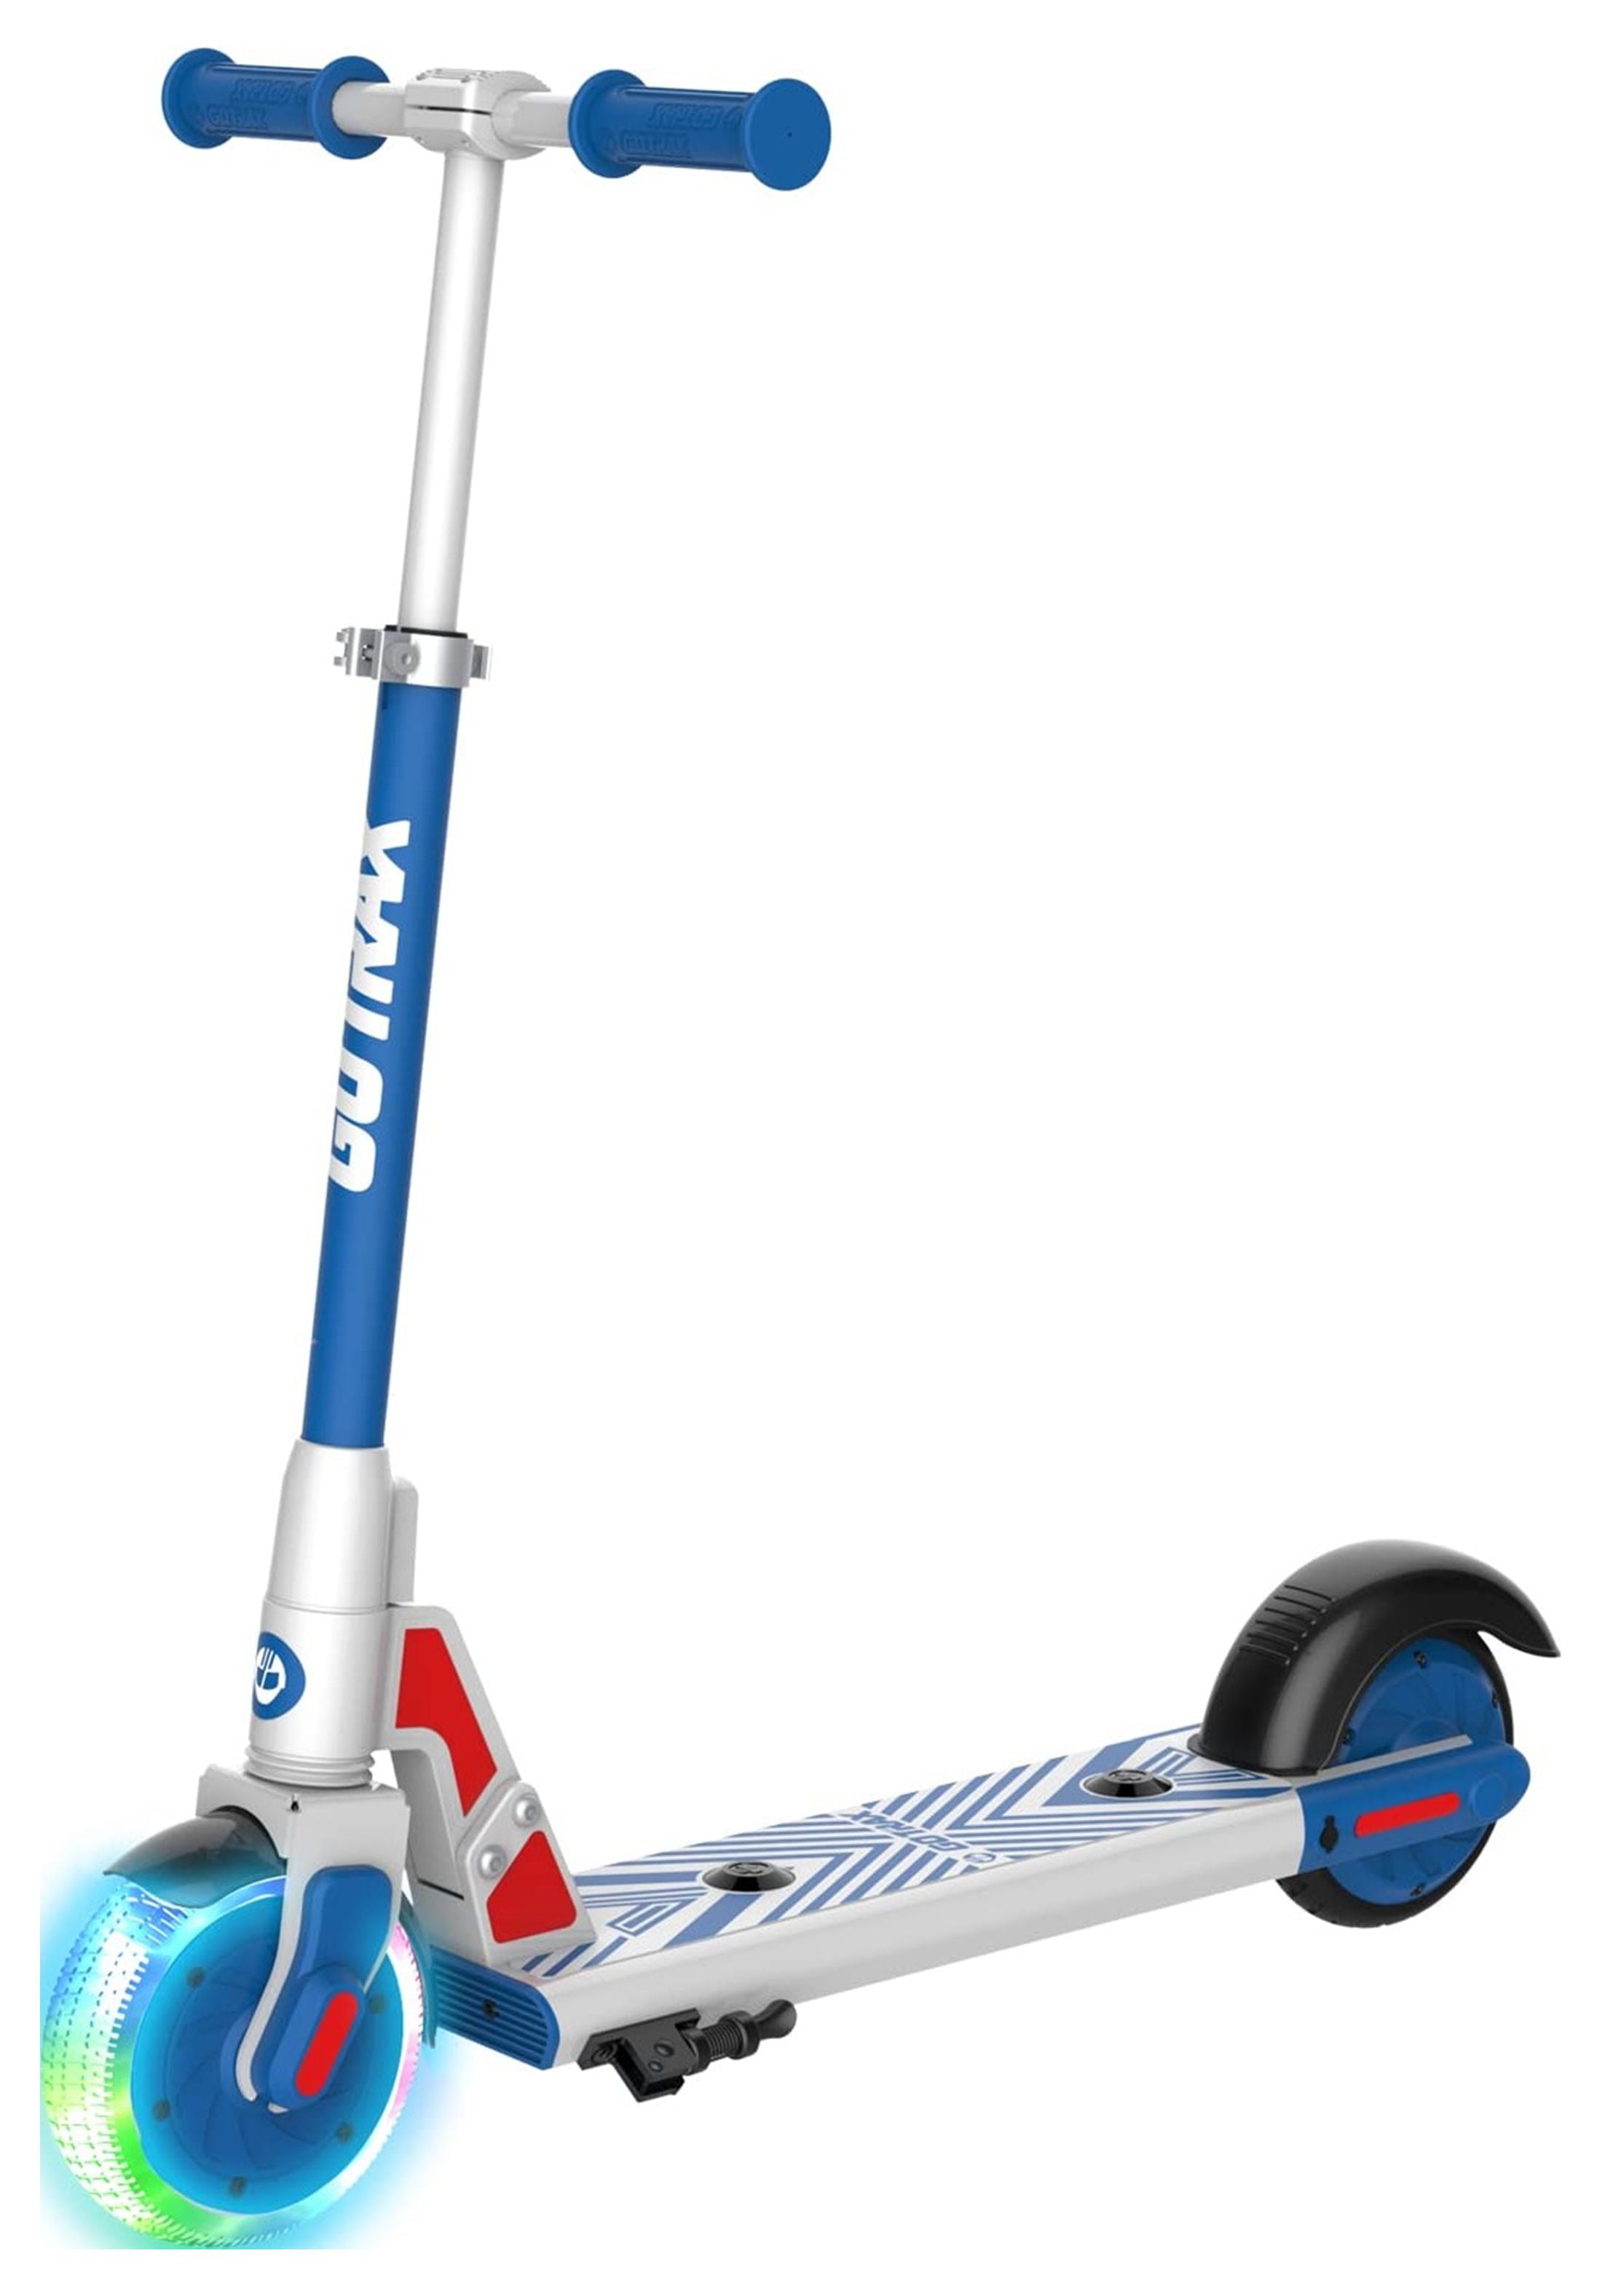 GOTRAX GKS Lumios Kids Electric Scooter, 6 Wheel 7.5mph Electric